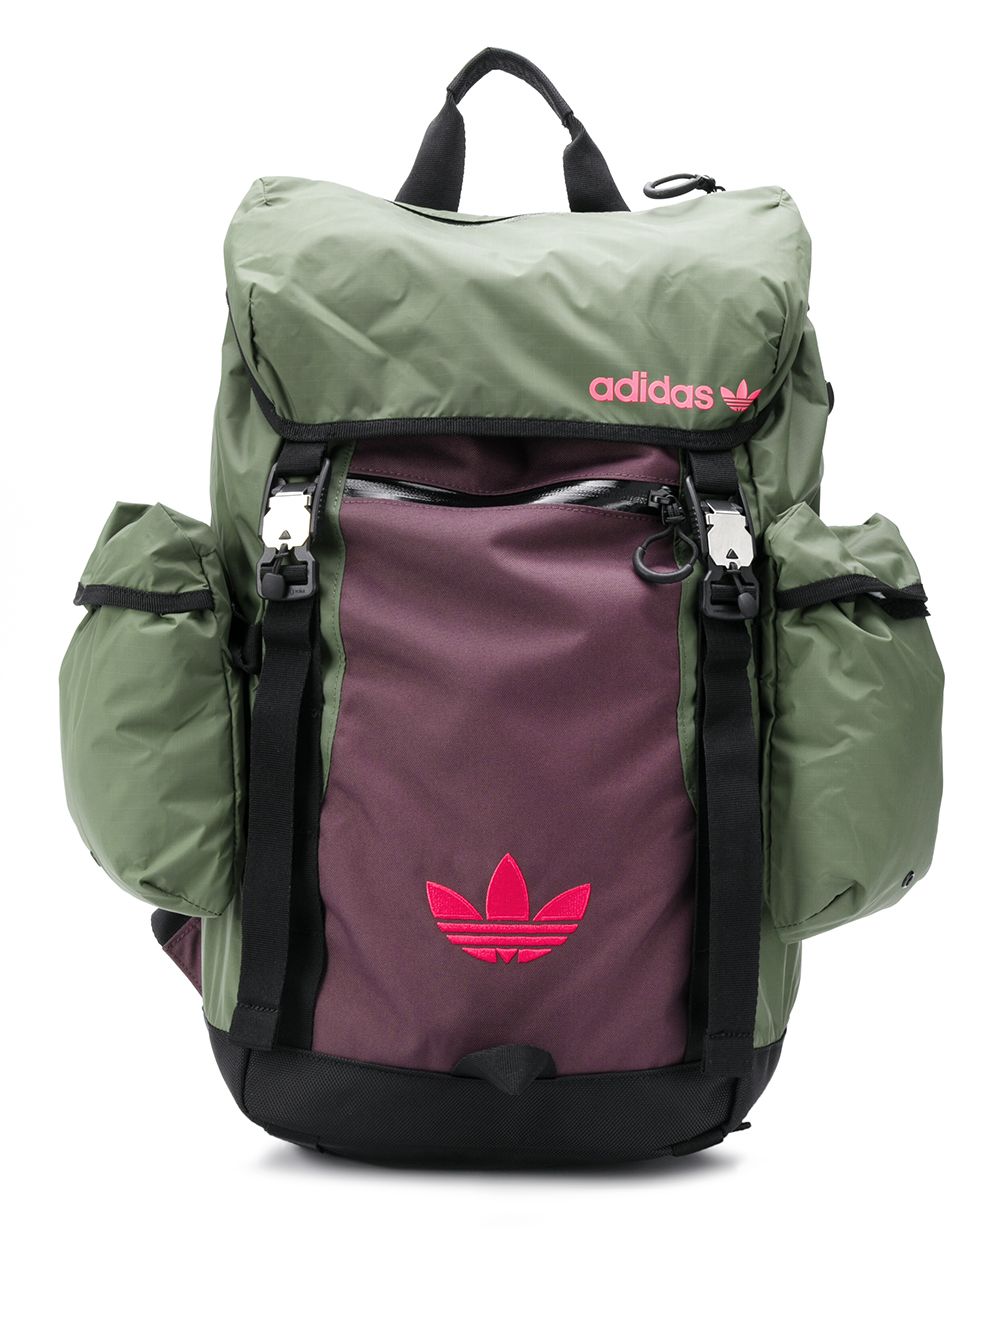 adidas backpack afterpay